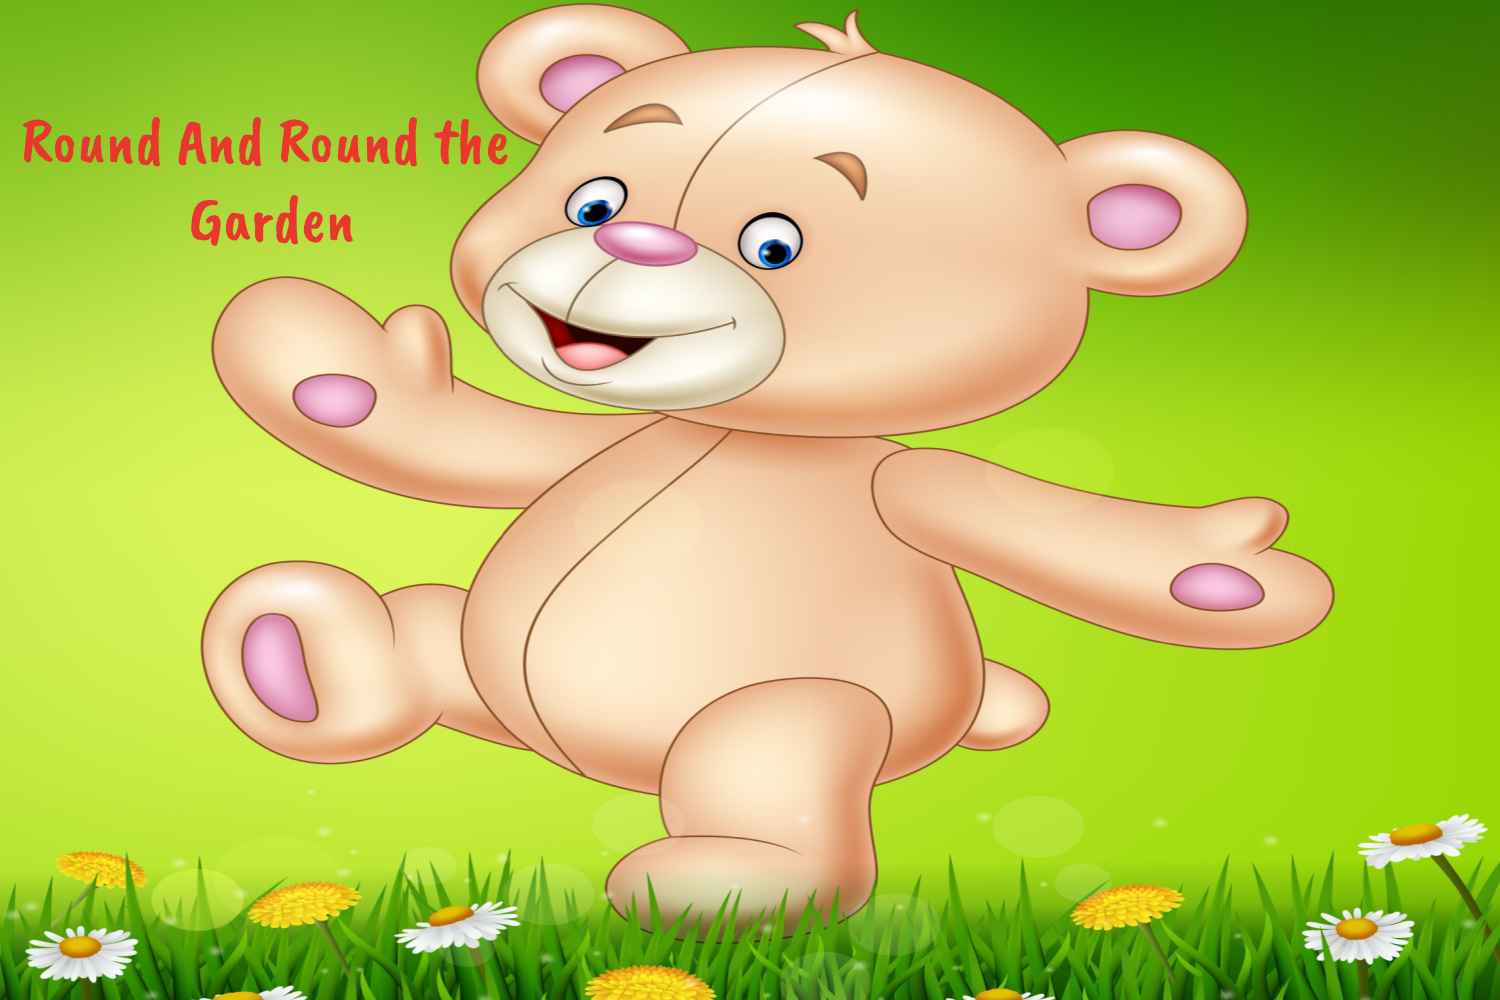 Round And Round the Garden Nursery Rhyme For babies